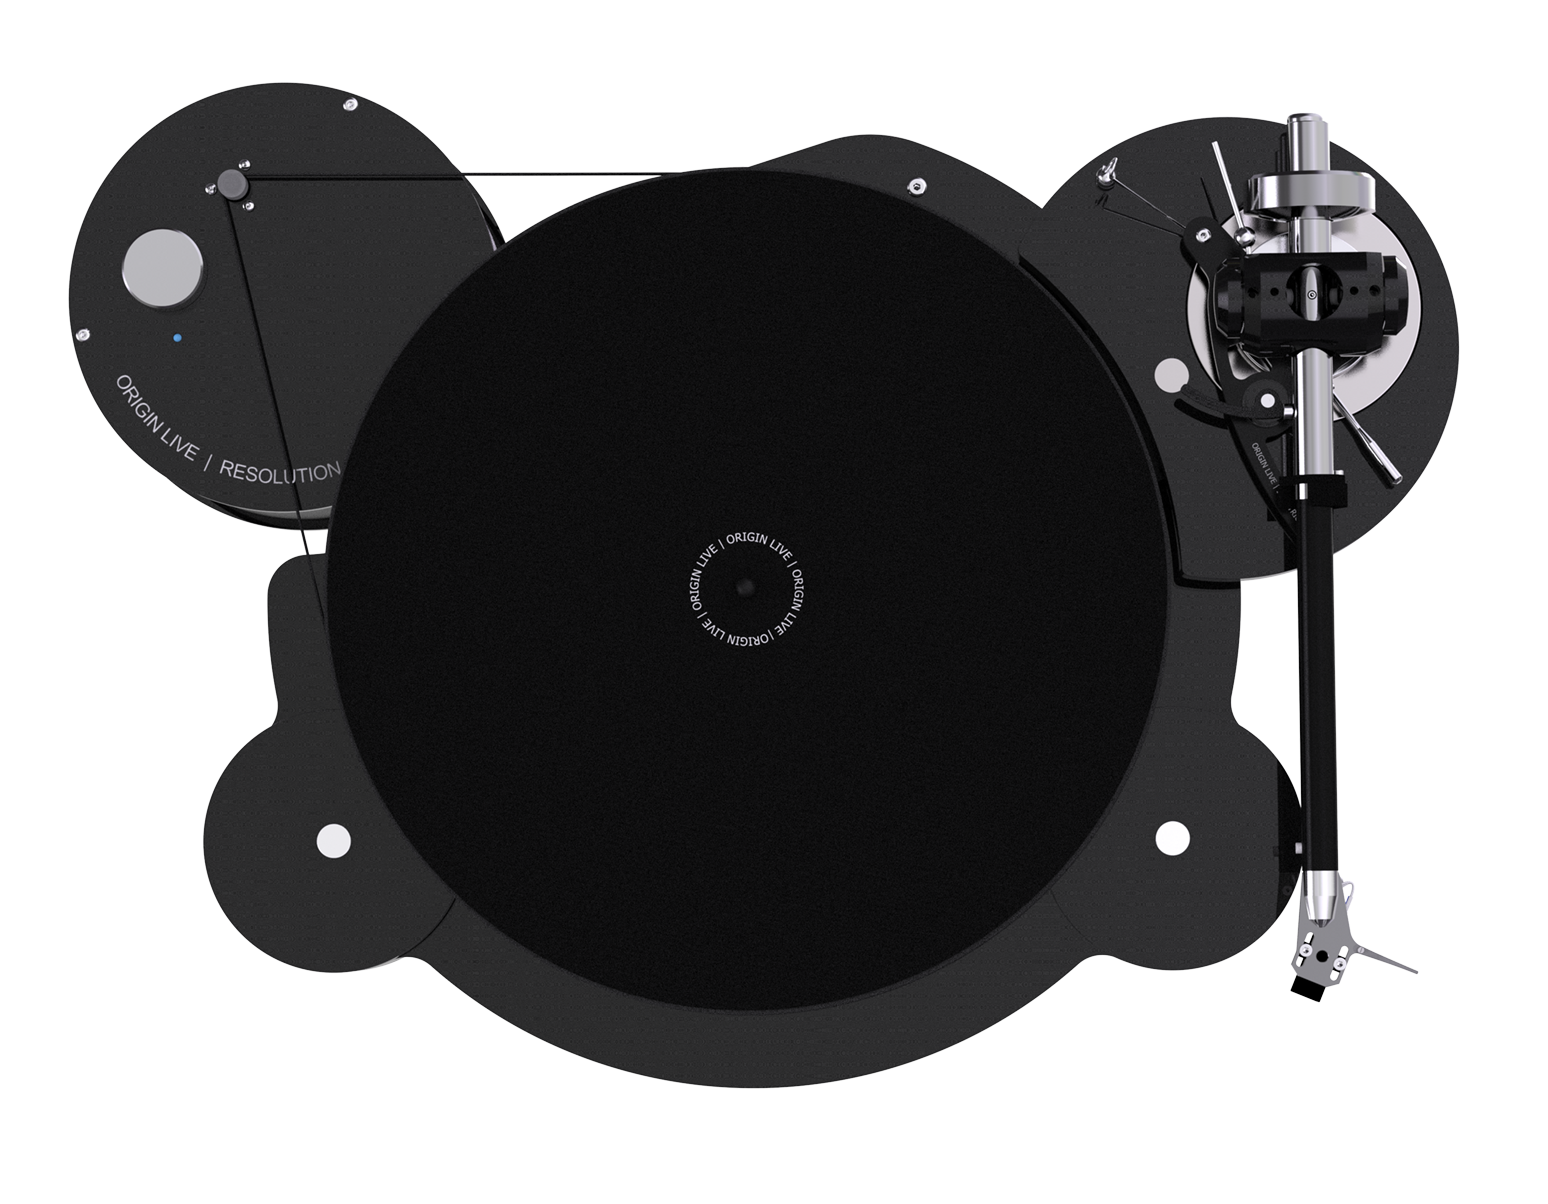 Origin Live Hi-Fi Resolution Turntable for analogue audio vinyl playback fitted with Illustrious tonearm high end sound at an affordable price with mid-century mid century retro styling